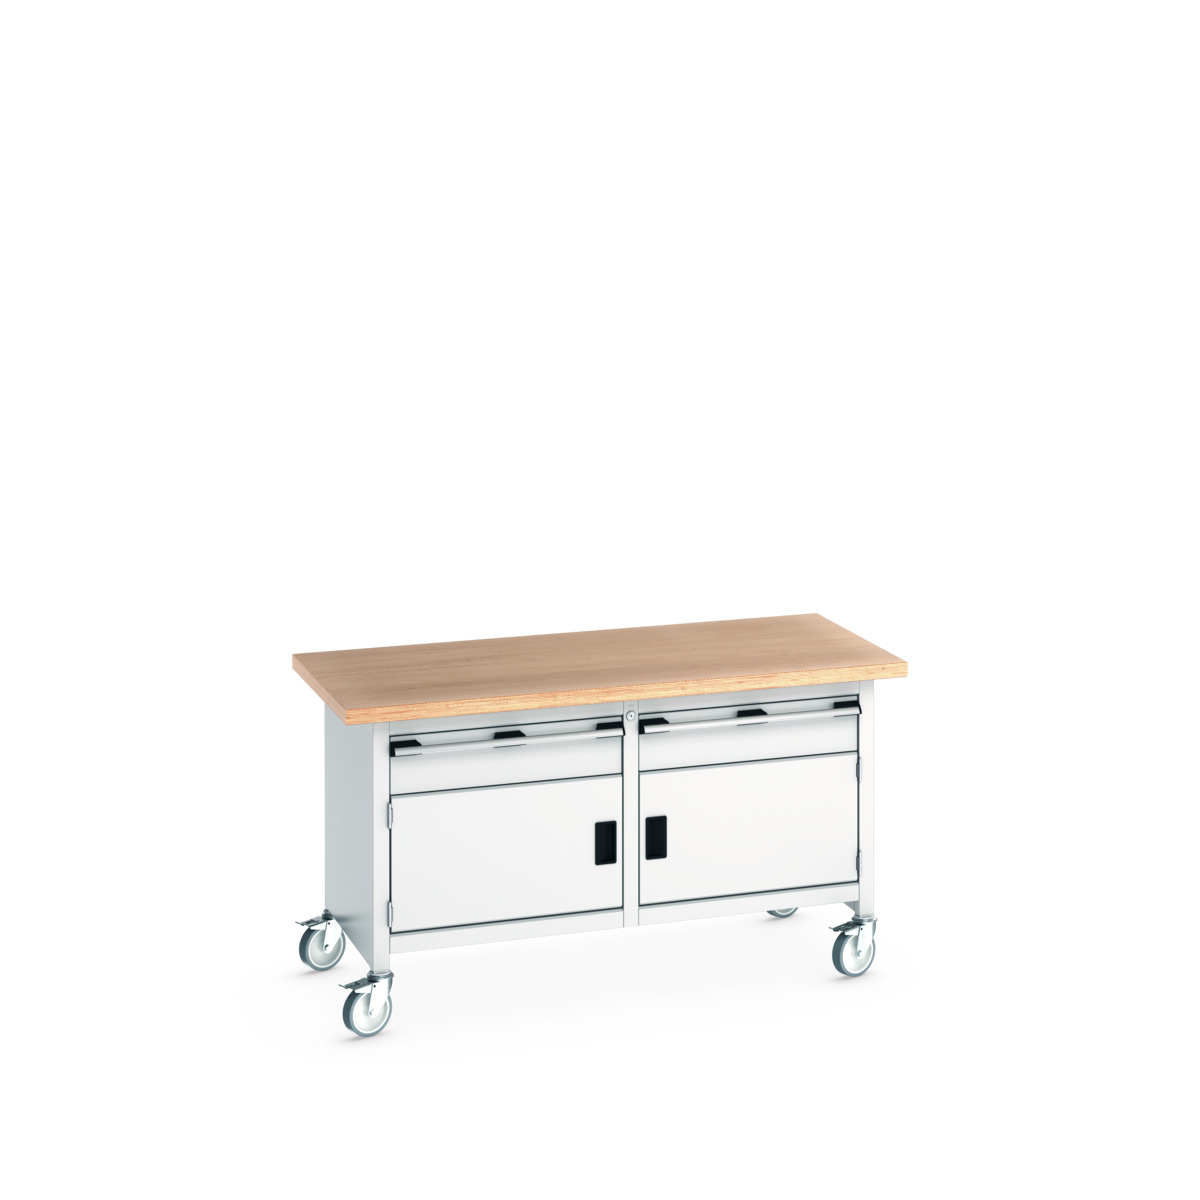 41002103.16V - cubio mobile storage bench (mpx)